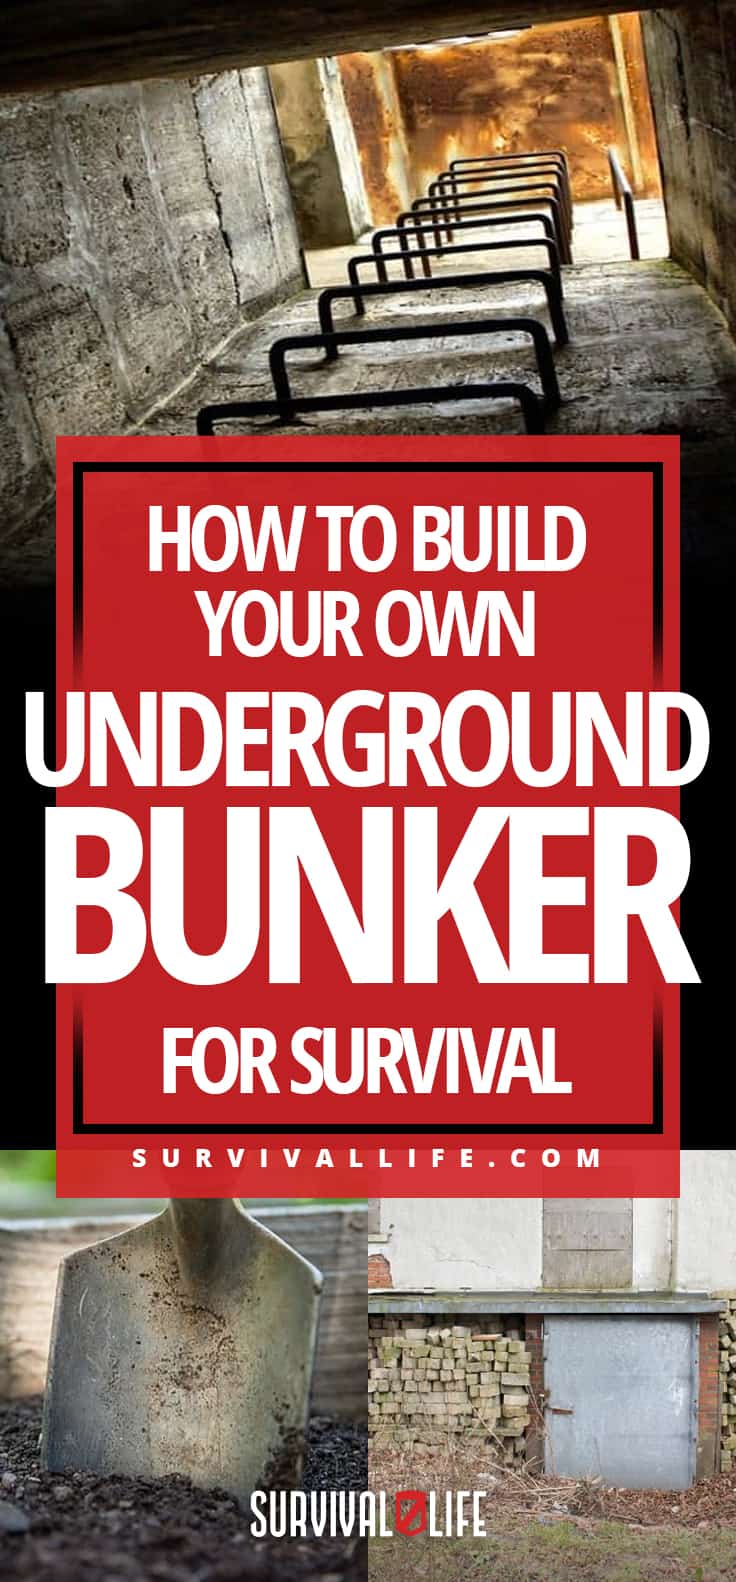 How To Build Your Own Underground Bunker For Survival | https://survivallife.com/underground-bunker/